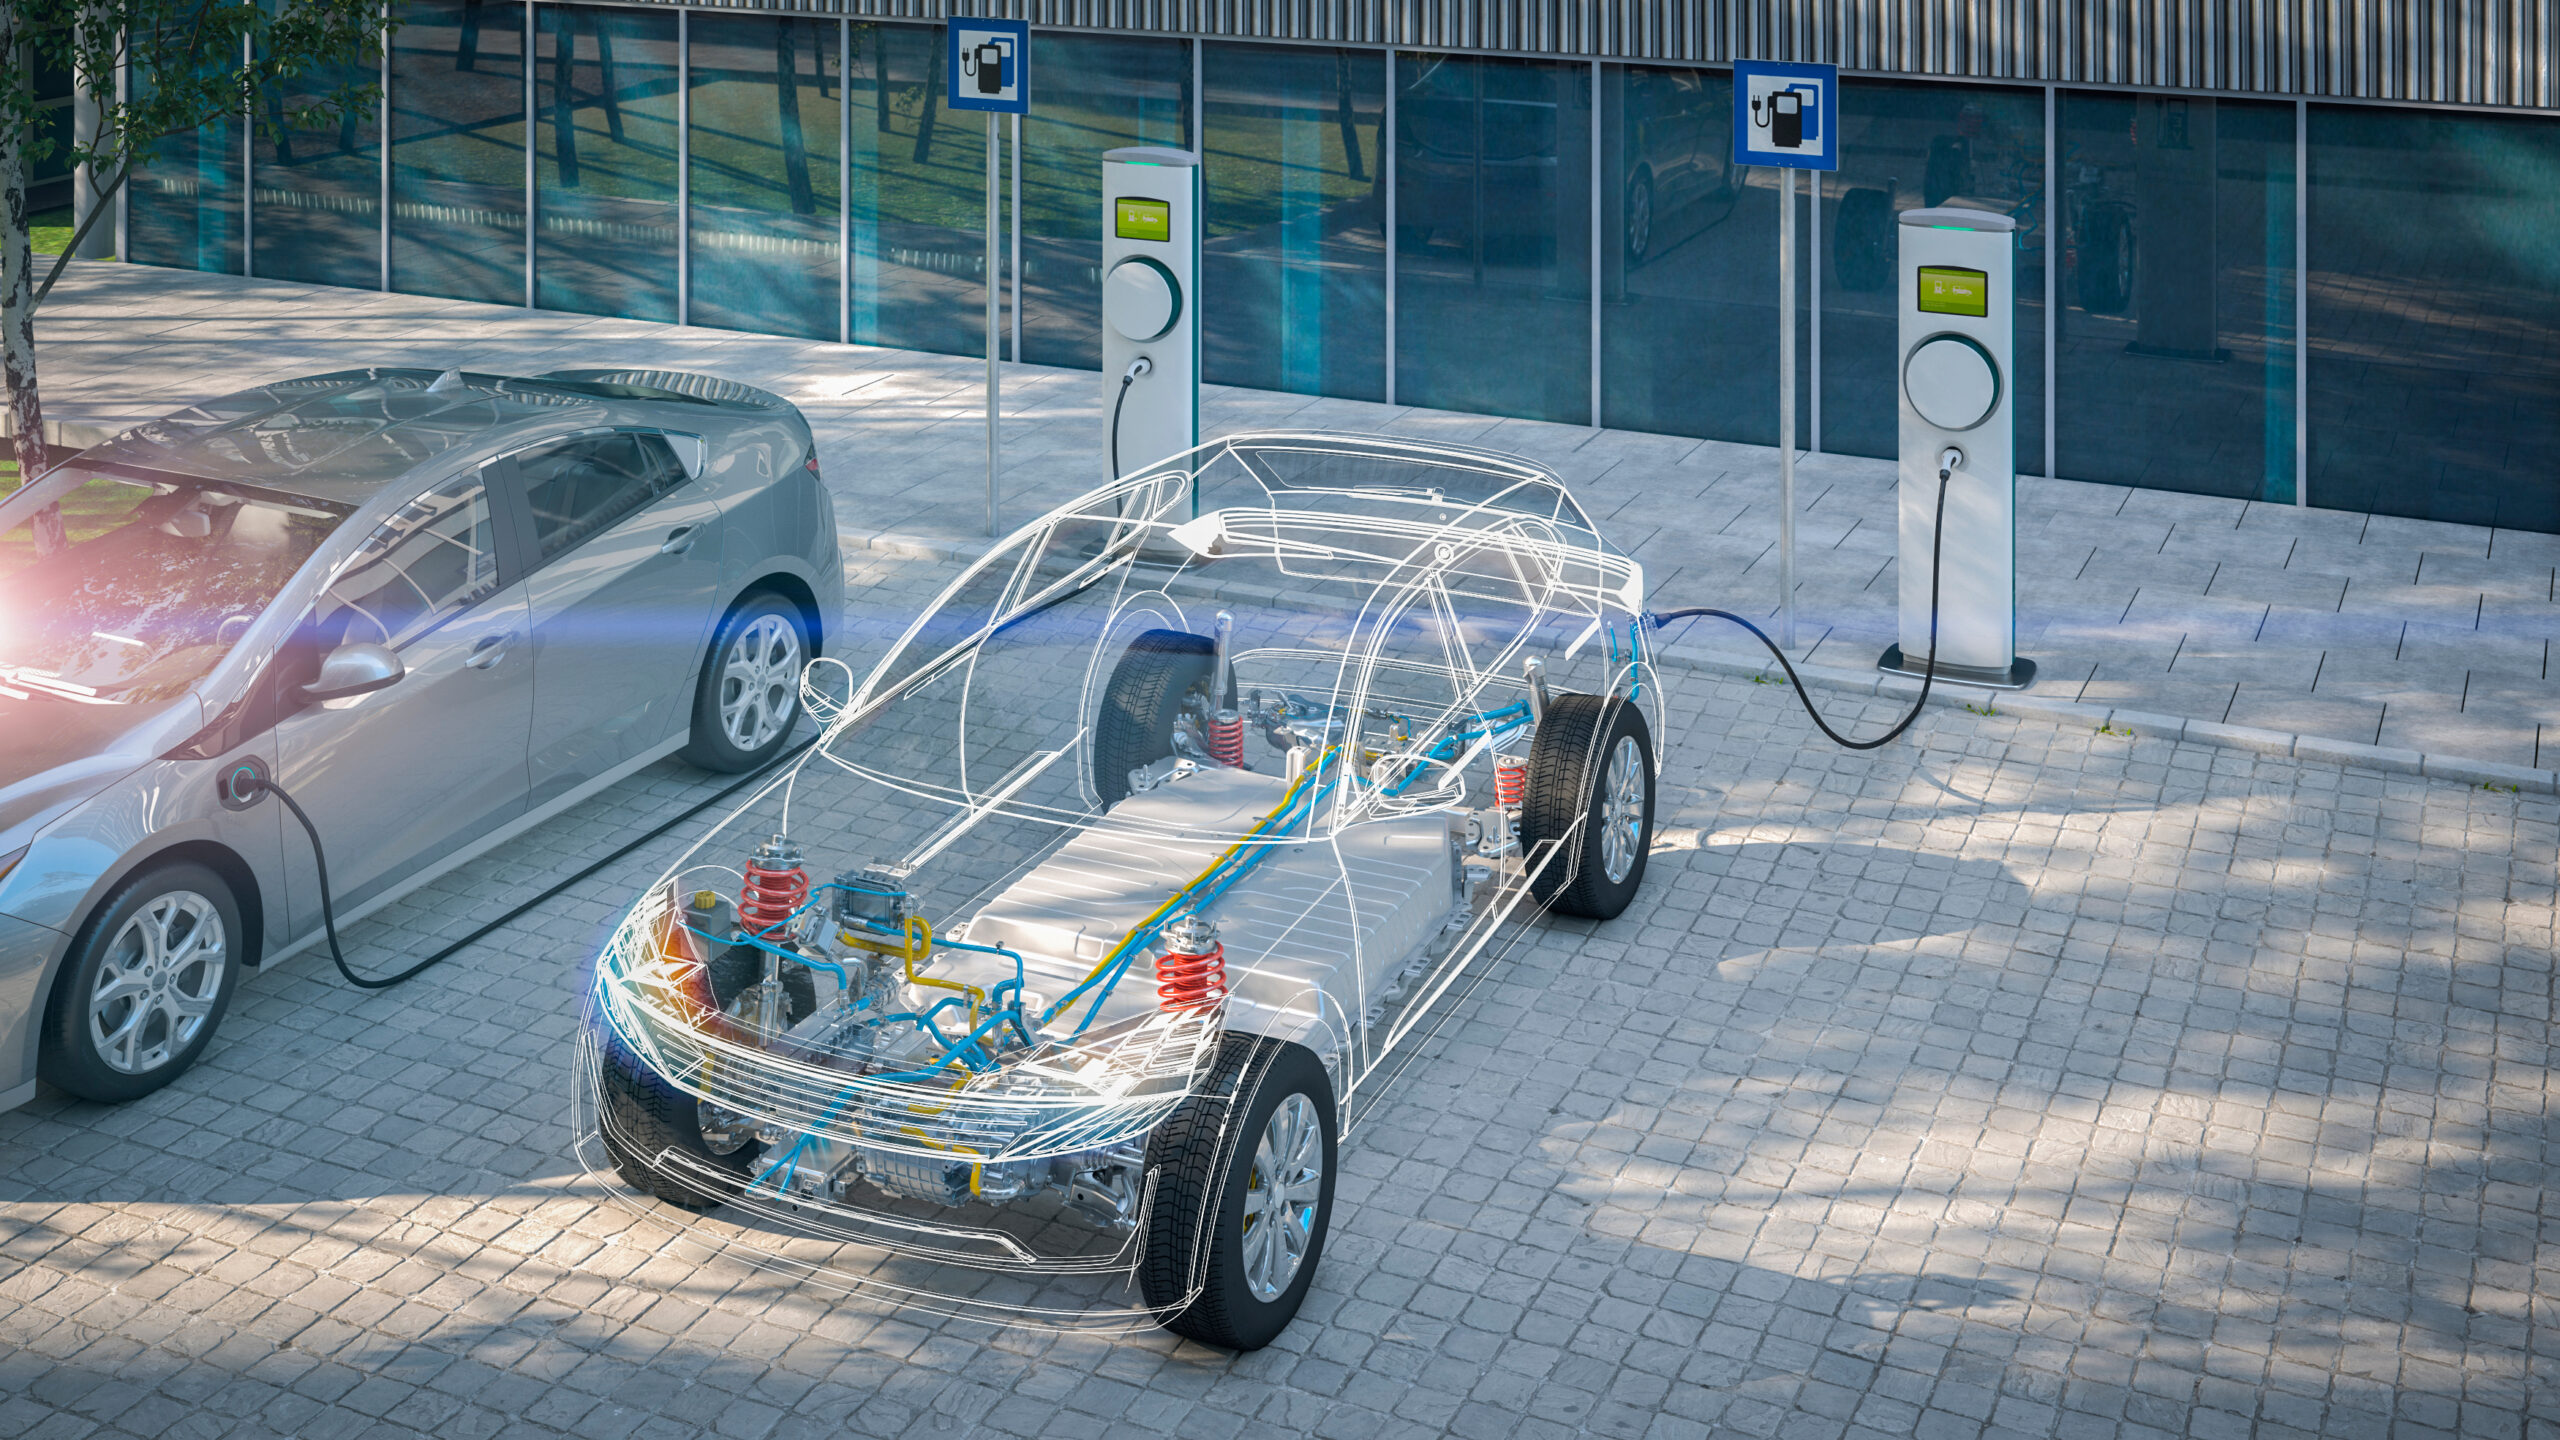 A realistic scene of electric cars charging at a station. One vehicle is fully visible, while the other has a semi-transparent overlay showing internal components like the battery and electrical wiring. The backdrop features a modern building and a tree casting shadows. - CSA Catapult